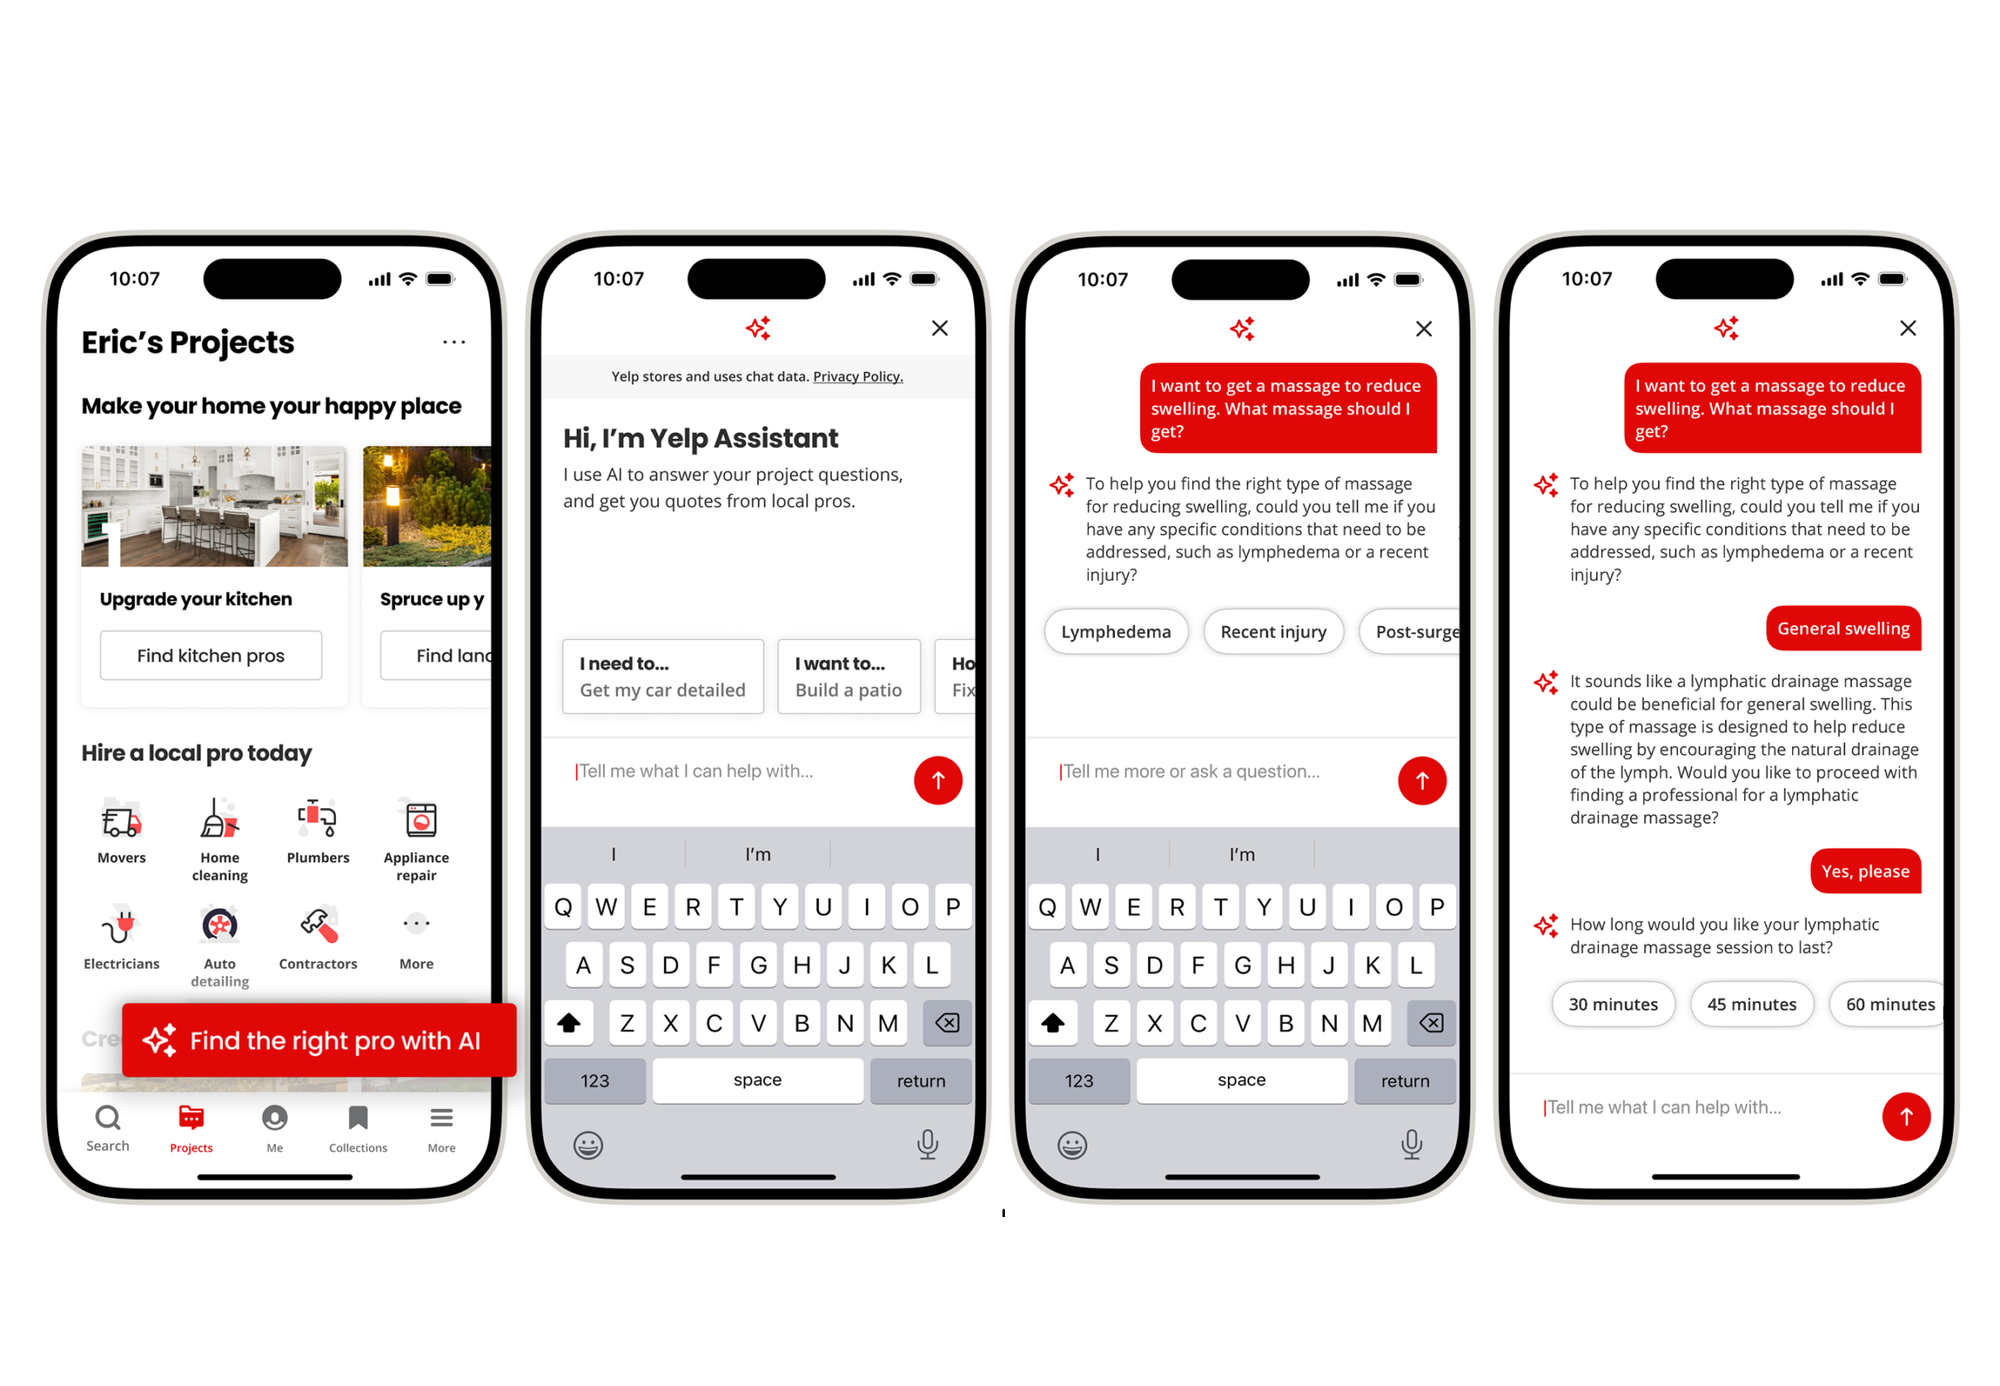 Yelp's Spring Product Release improves the service's experience with new AI-powered features